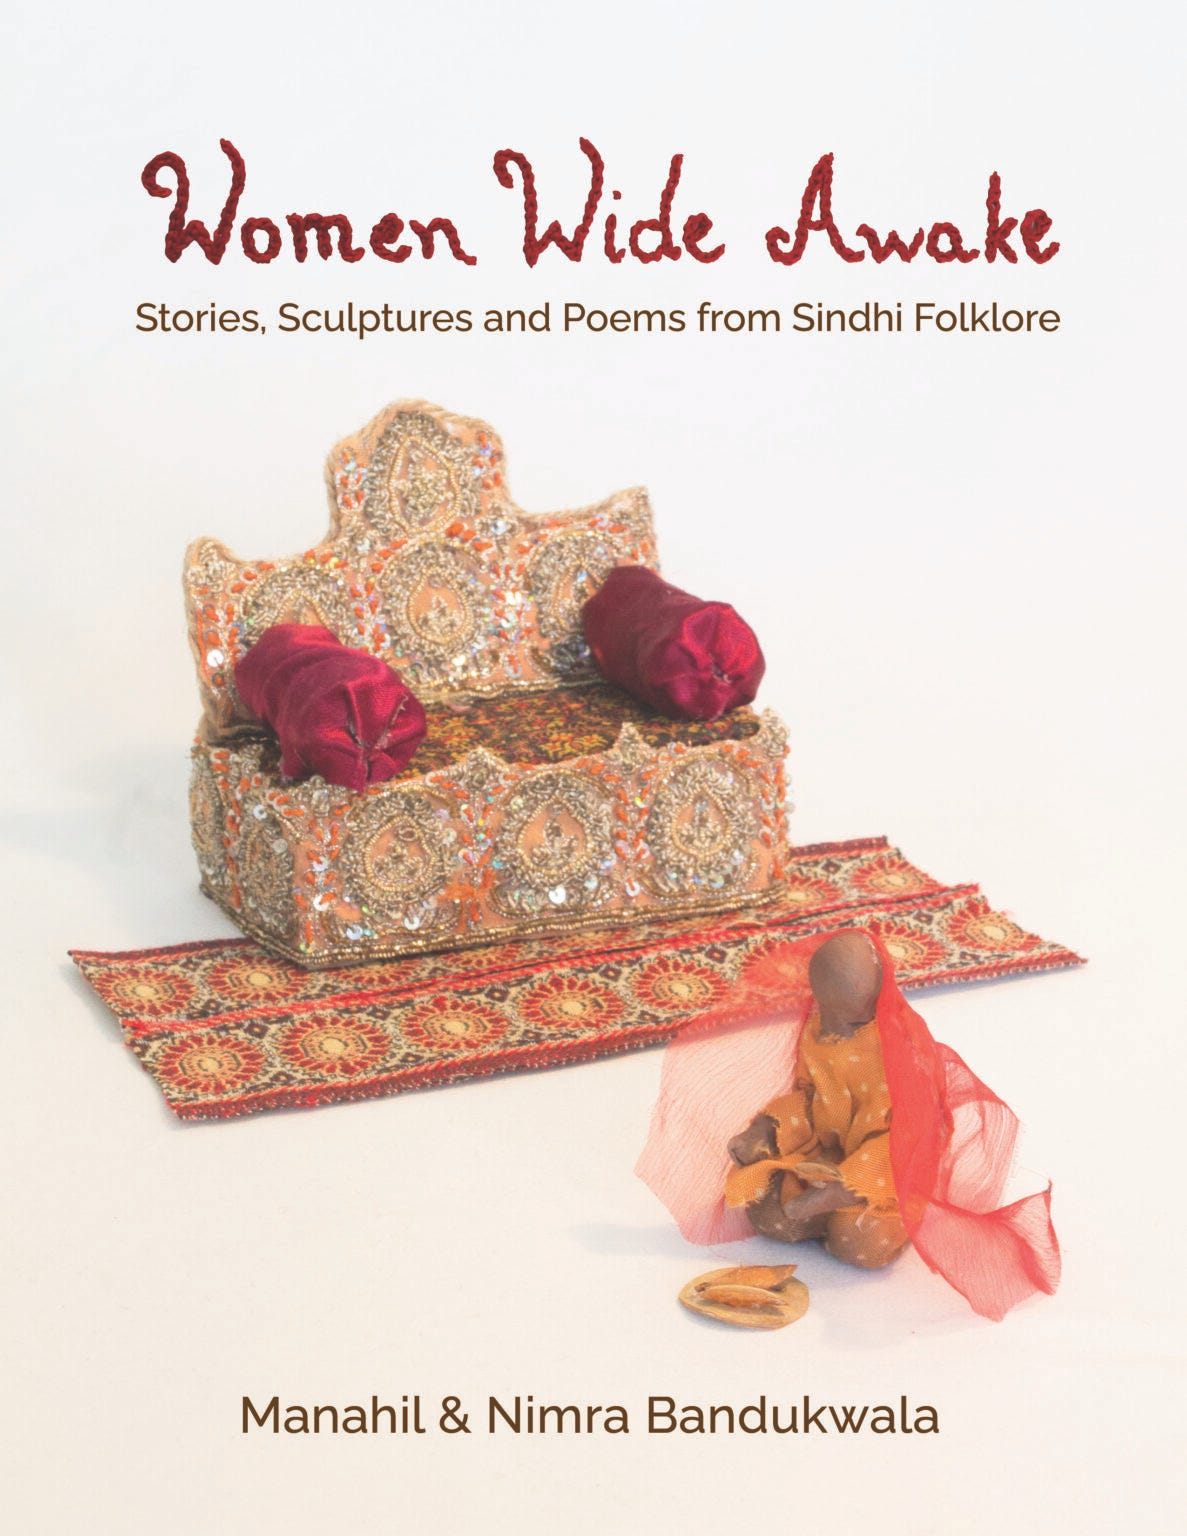 Text: Women Wide Awake (in embroidery); subtitle: Stories, Sculptures and Poems from Sindhi Folkore